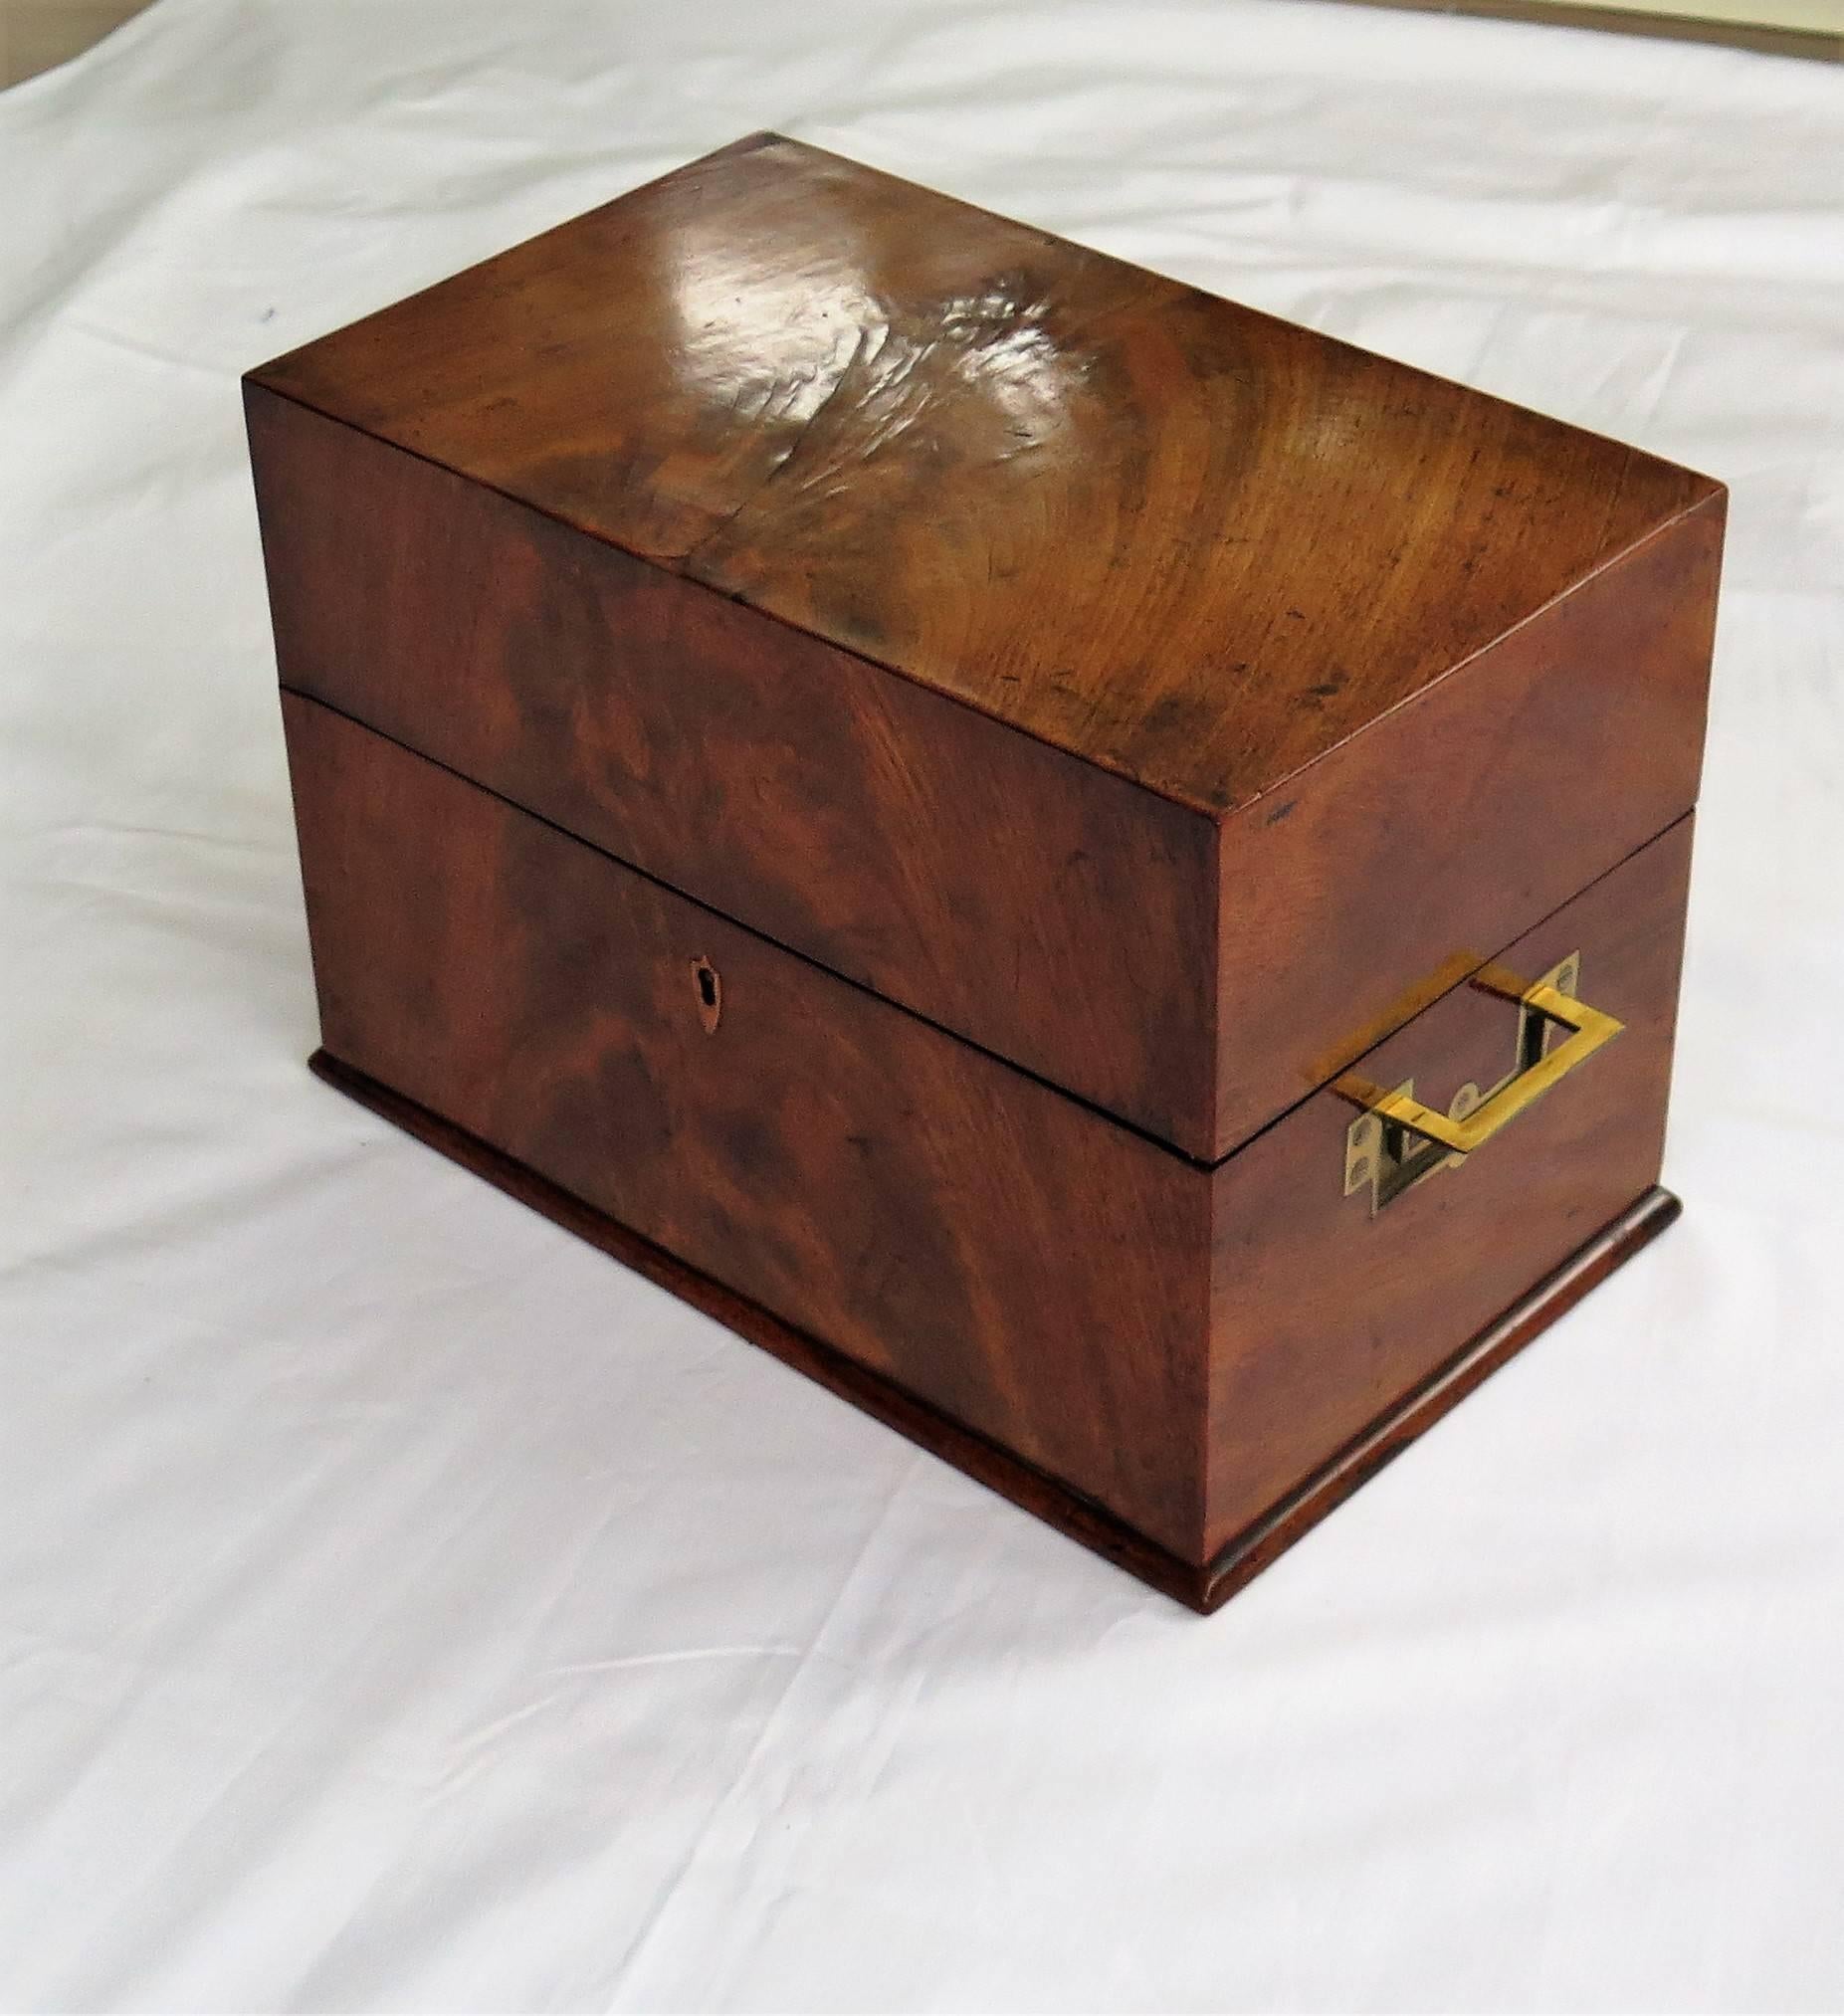 This is a very good, well made, Georgian, English Box which could be used as a work or storage box, useful for documents, treasures or valuables alike.

The box is well hand made with a hinged top, dovetailed joint construction and having beautiful